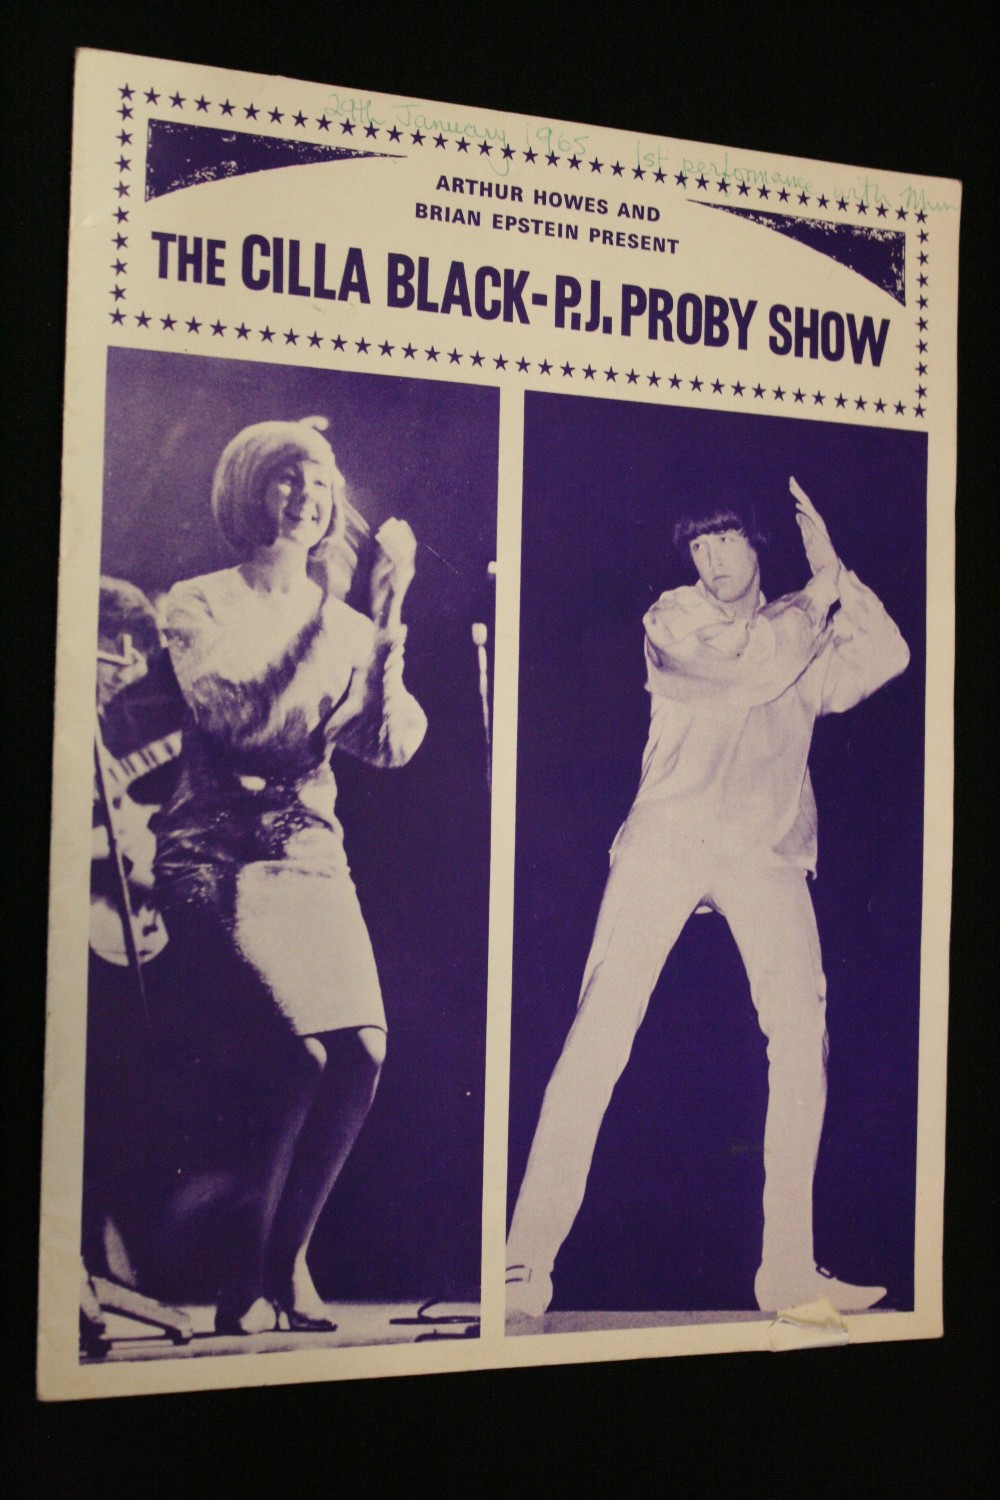 60s CONCERT PROGRAMMES - a collection of 11 concert programmes from the sixties. - Image 3 of 3